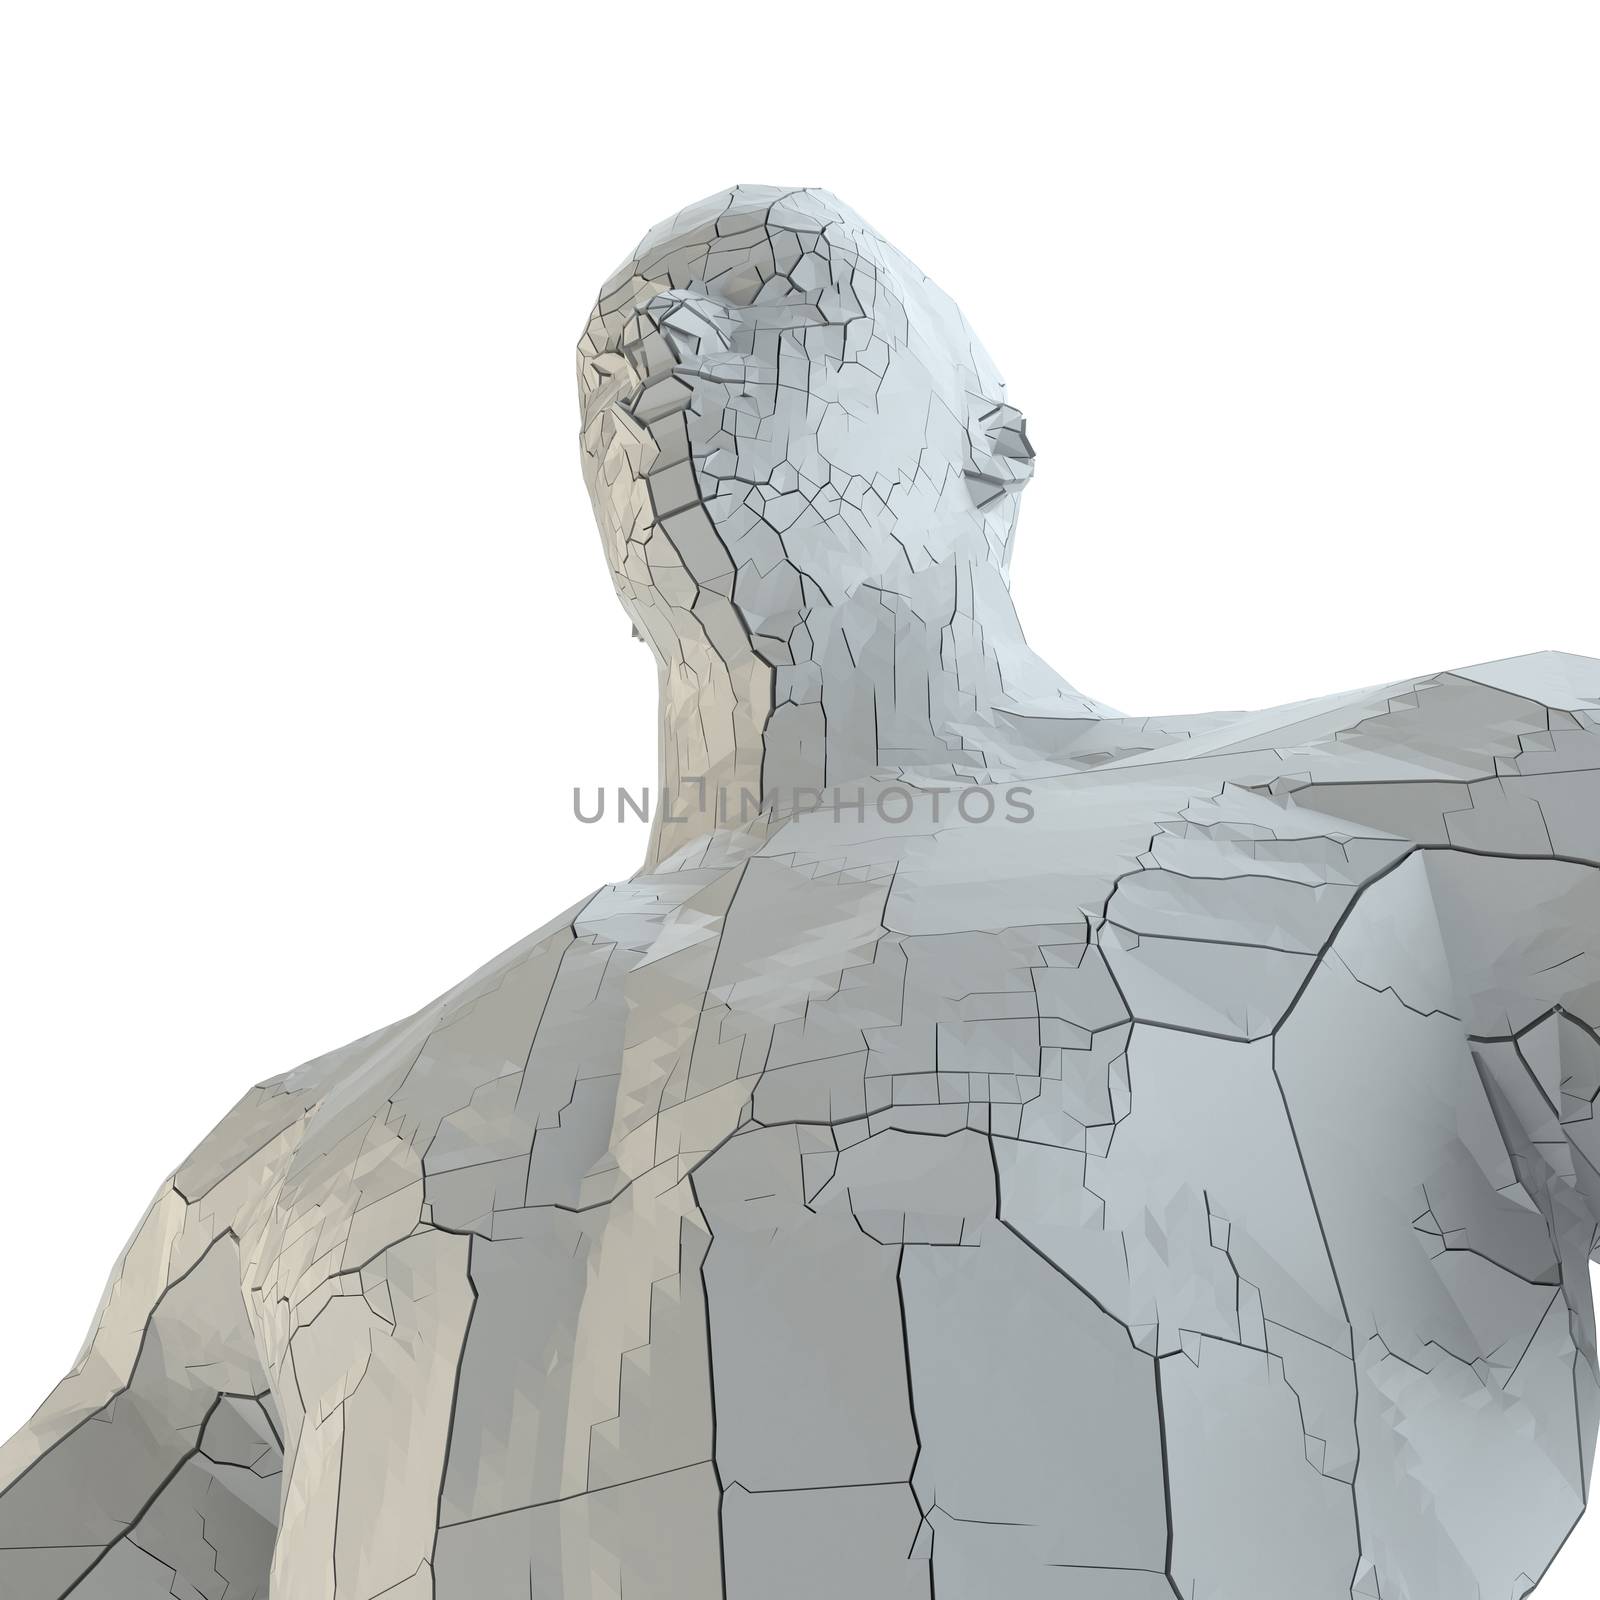 Abstract muscular robot or bodybuilder of white color with cracks in the body. 3D illustration. Isolated on white background